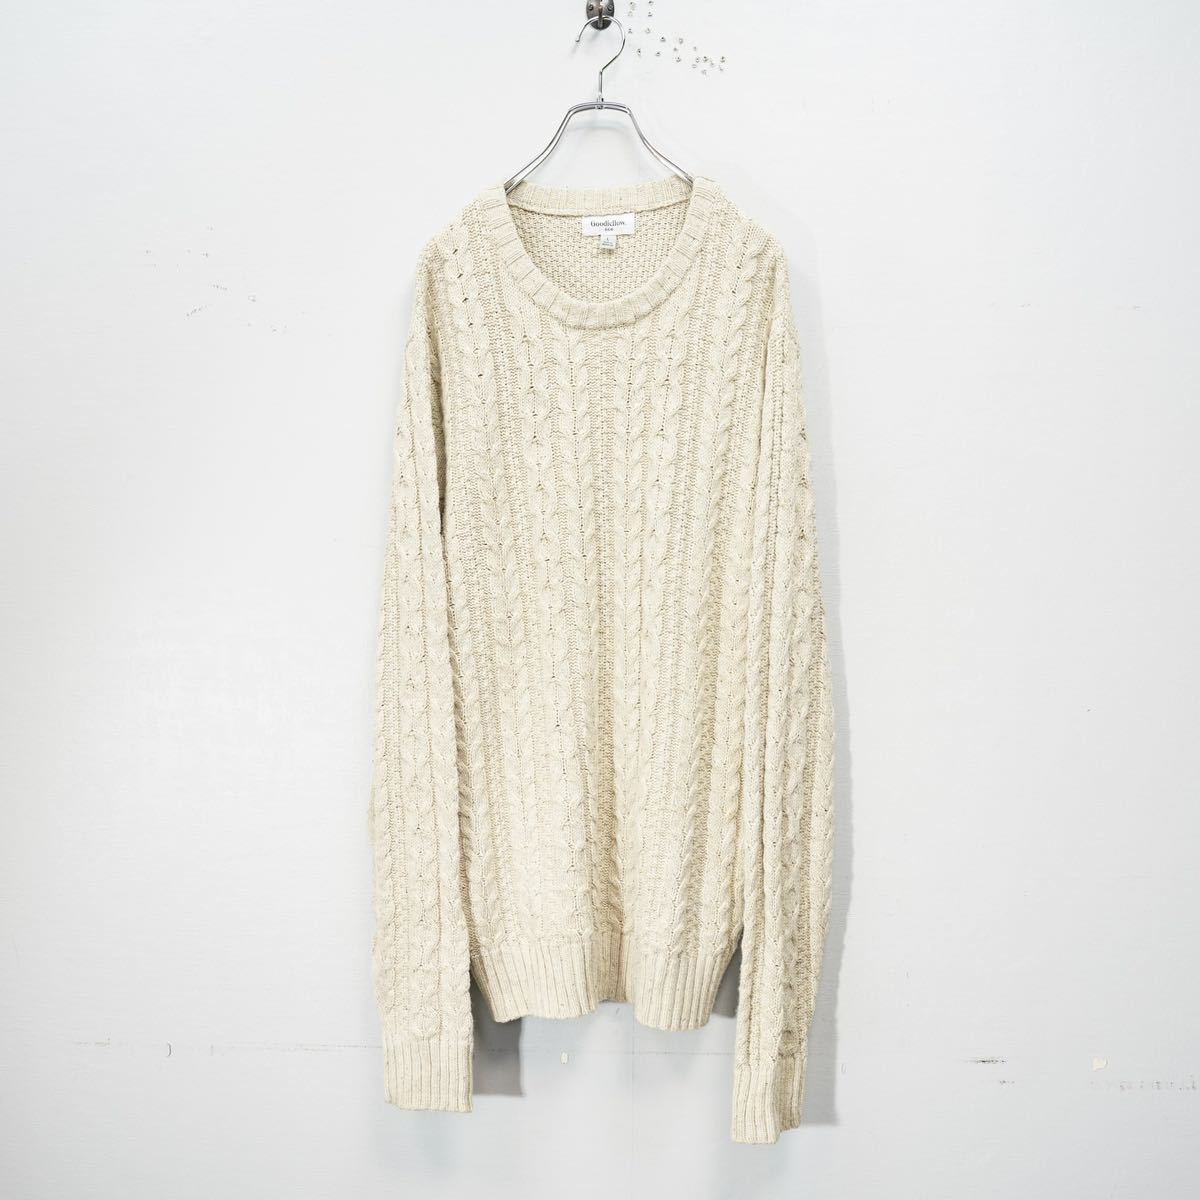 USA VINTAGE GOODIELLOW&CO CABLE DESIGN OVER KNIT/アメリカ古着ケーブルデザインオーバーニット